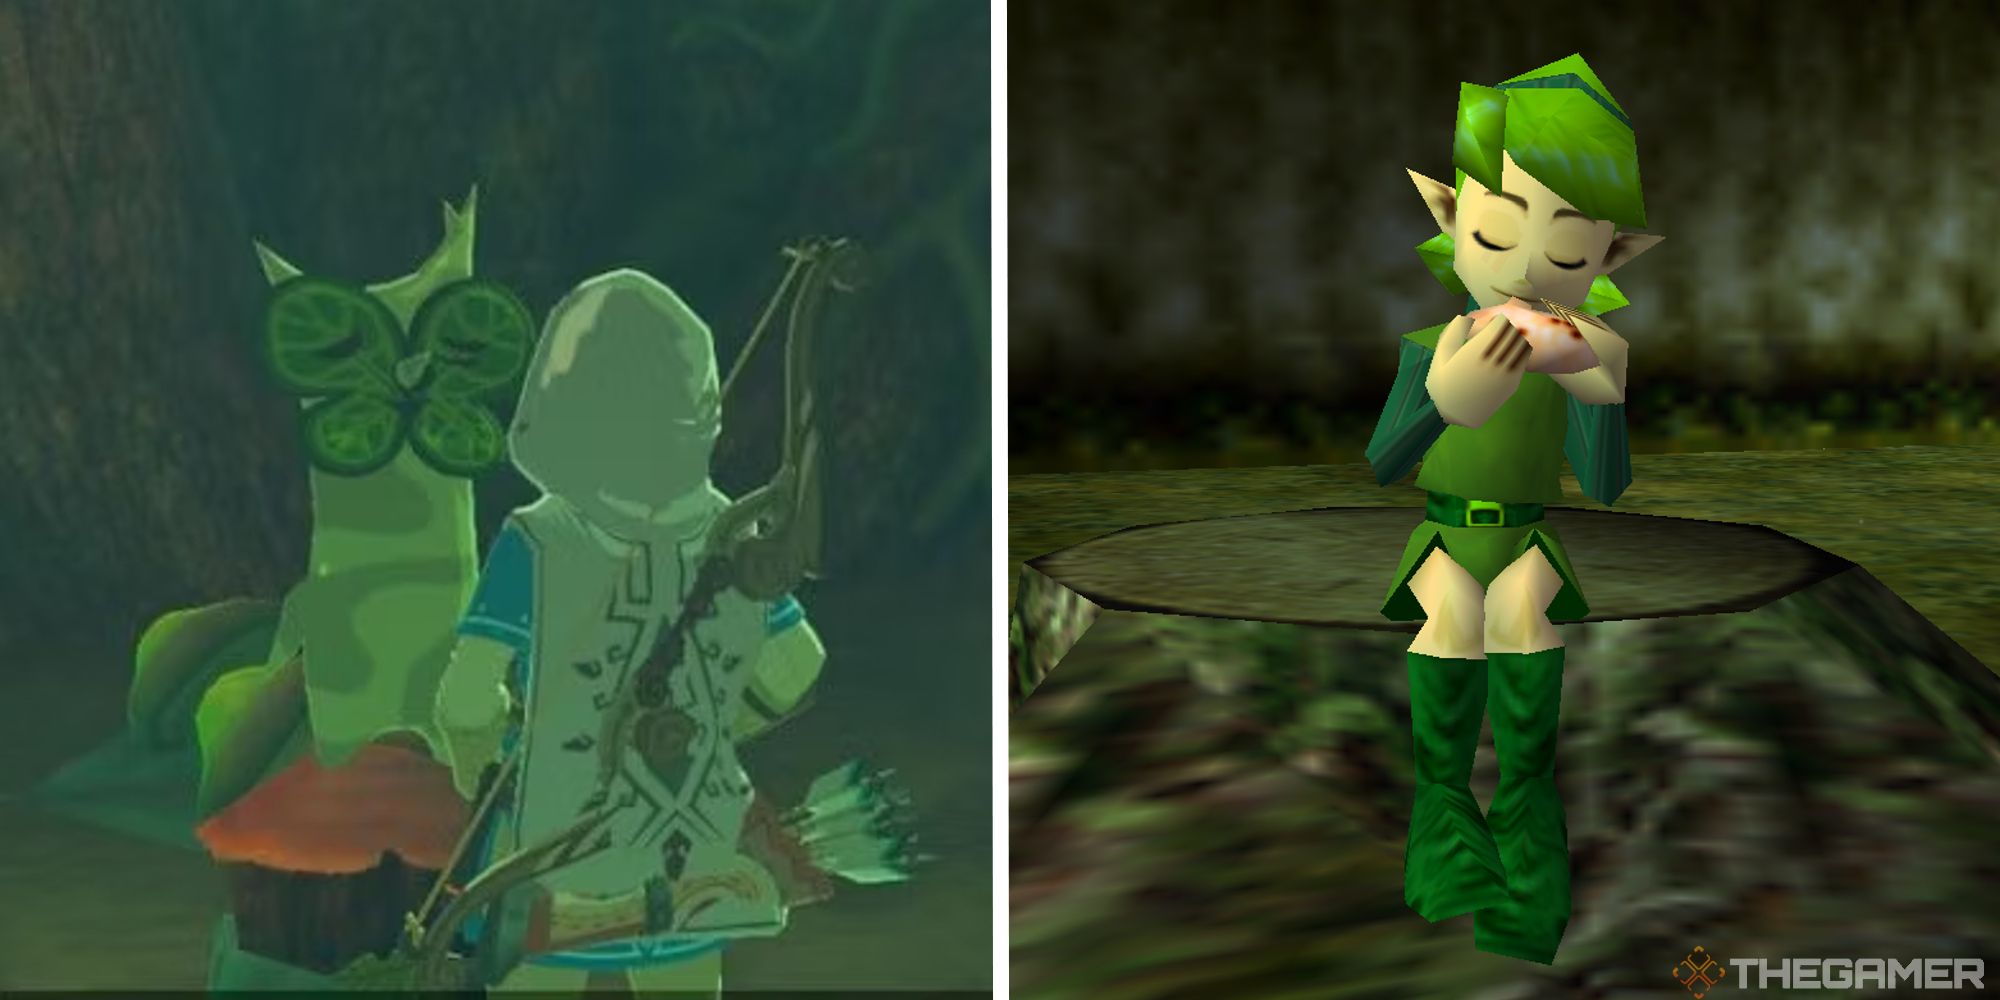 split image showing link talking to a korok, next to image of saria playing the ocarina